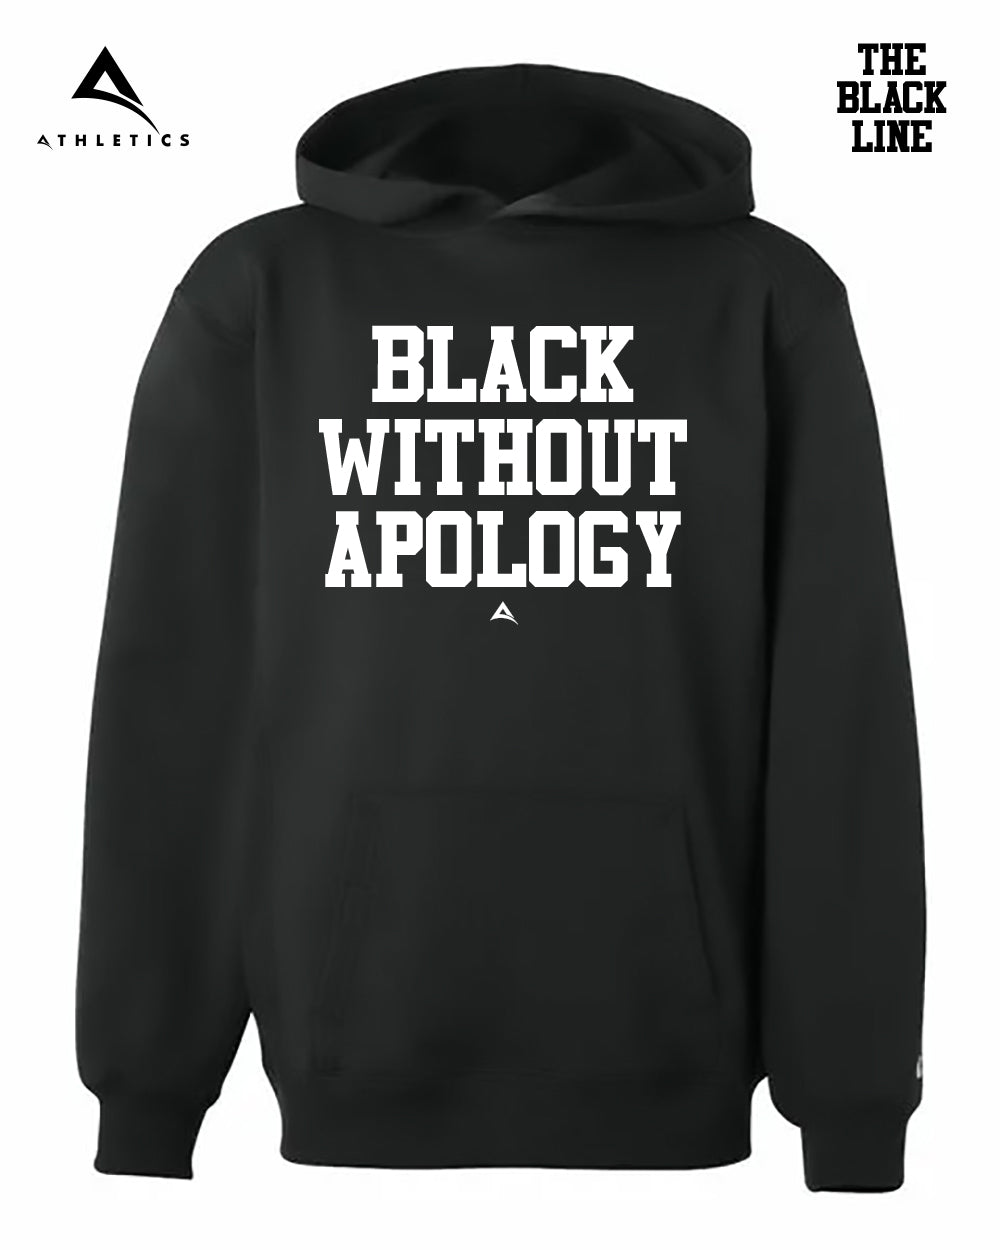 BLACK WITHOUT APOLOGY